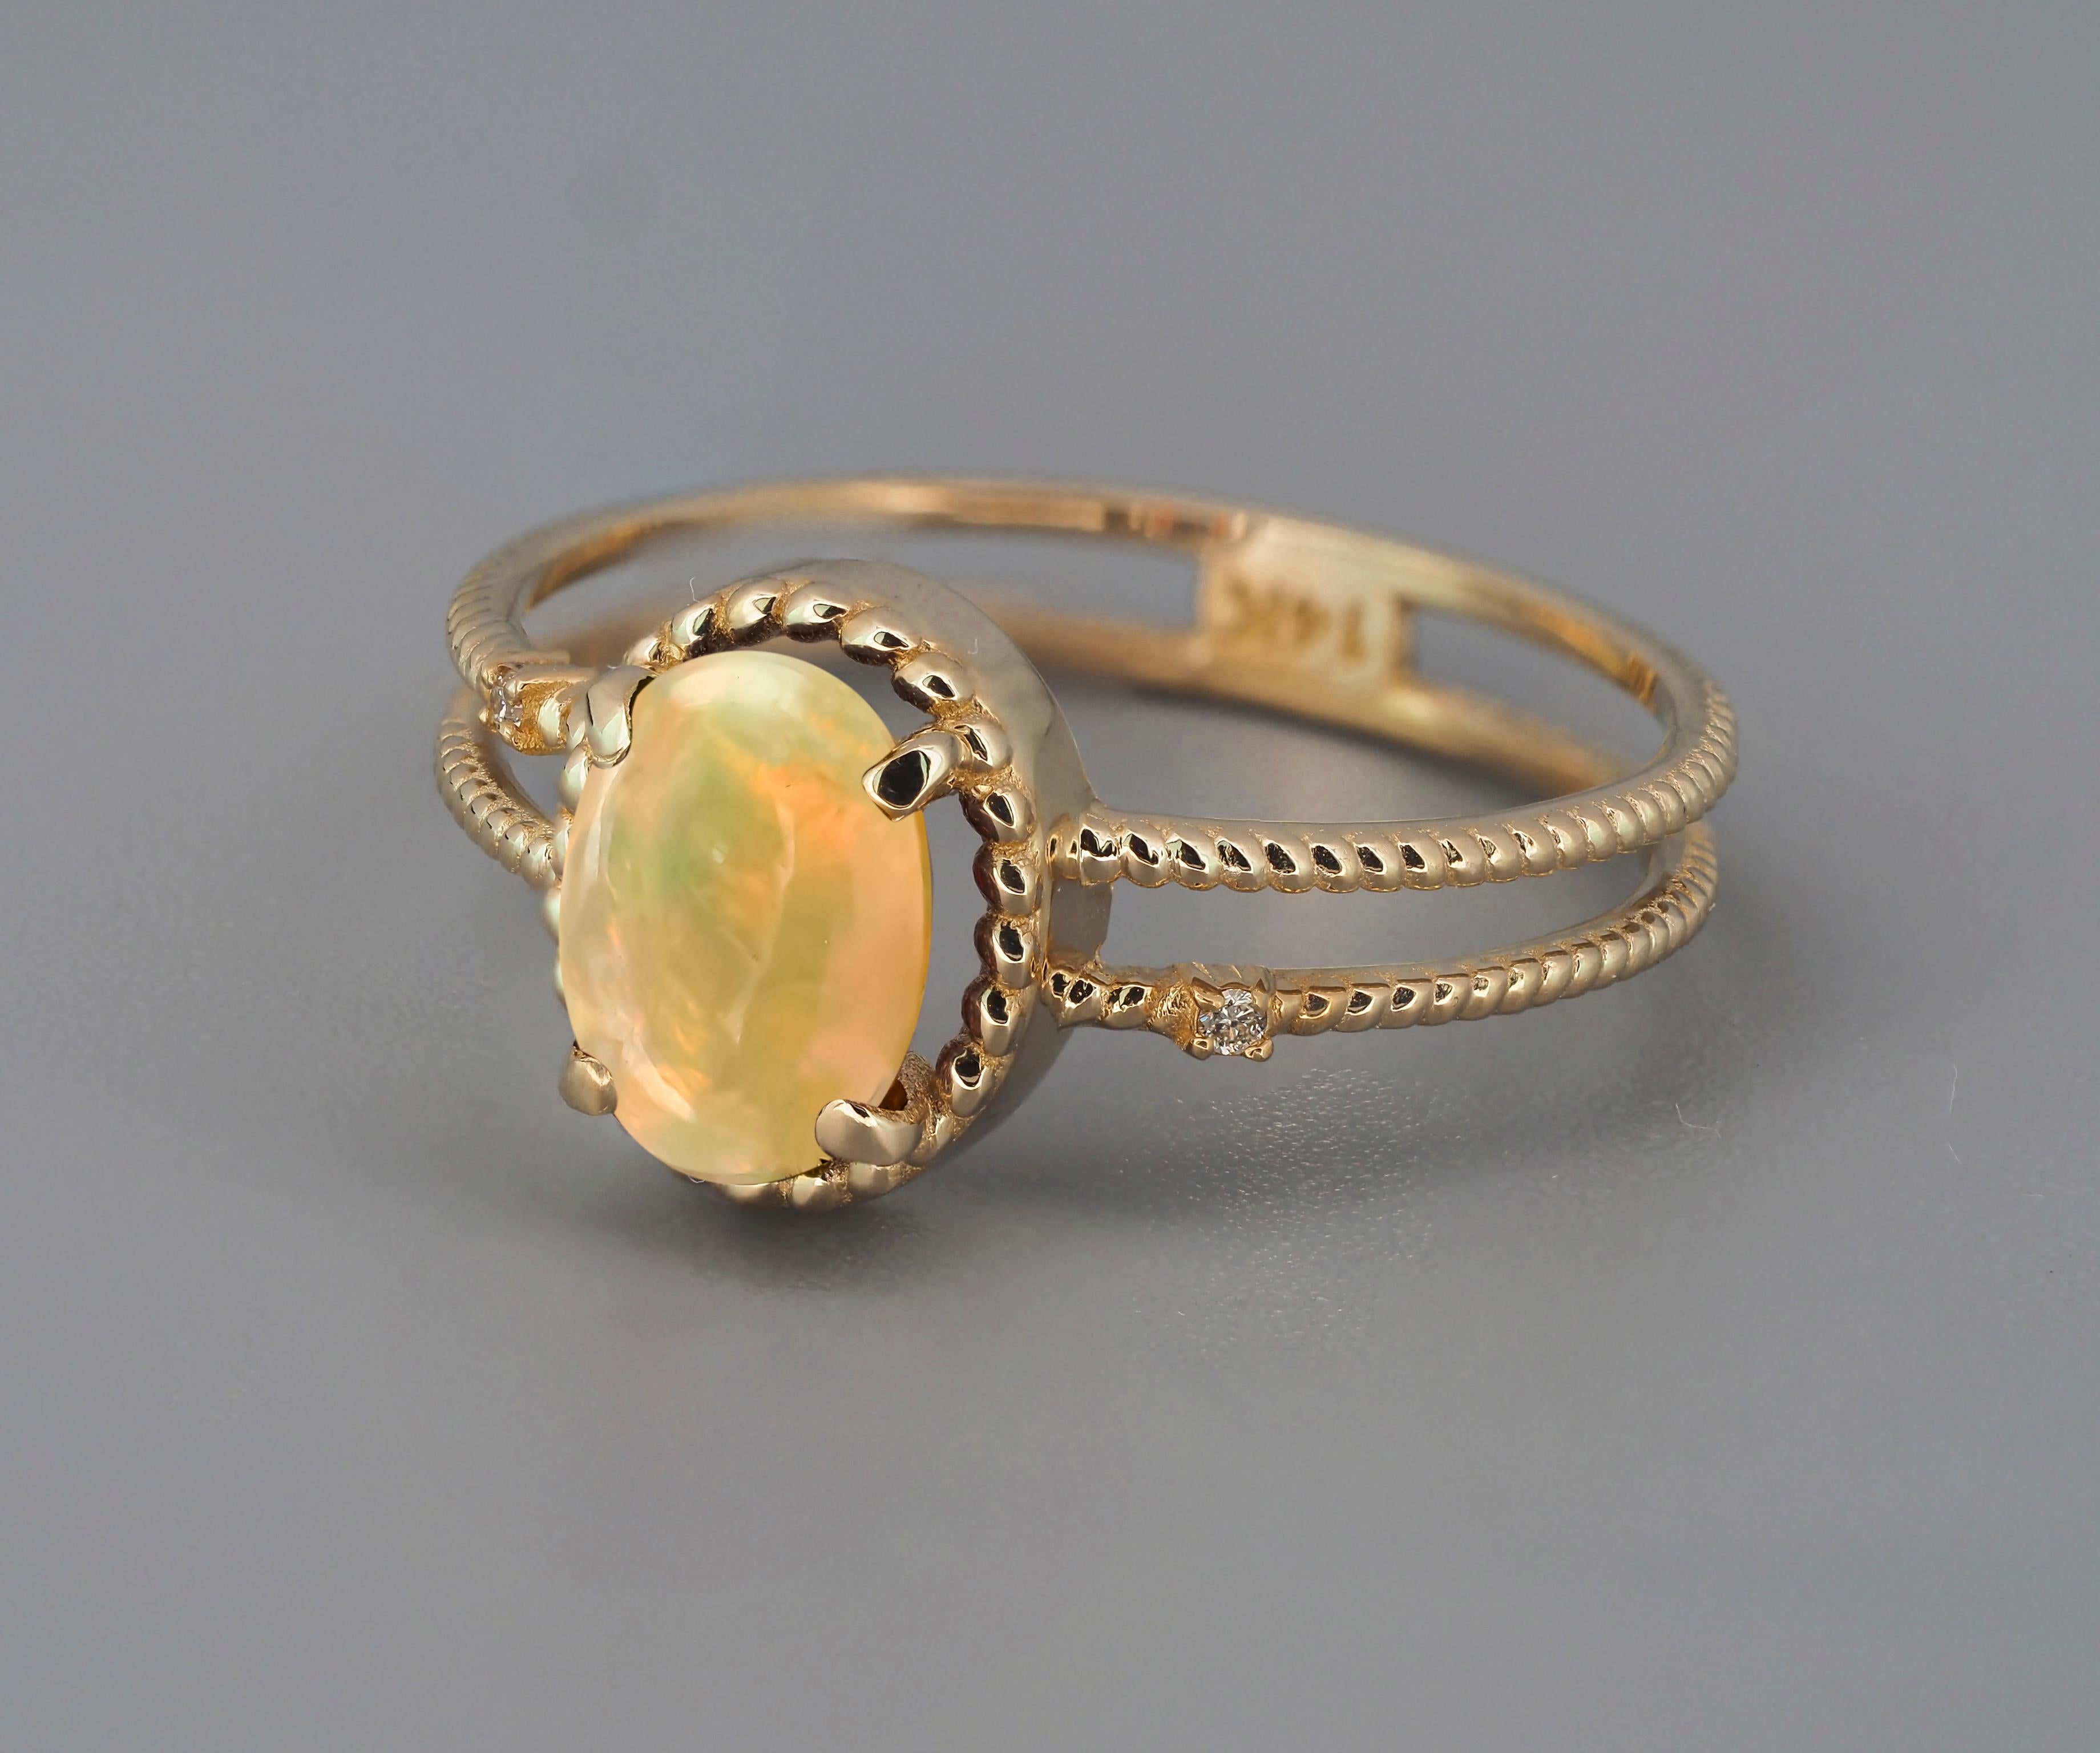 Modern Cabochon Opal Ring, 14k Gold Ring with Opal, Minimalist Opal Ring For Sale